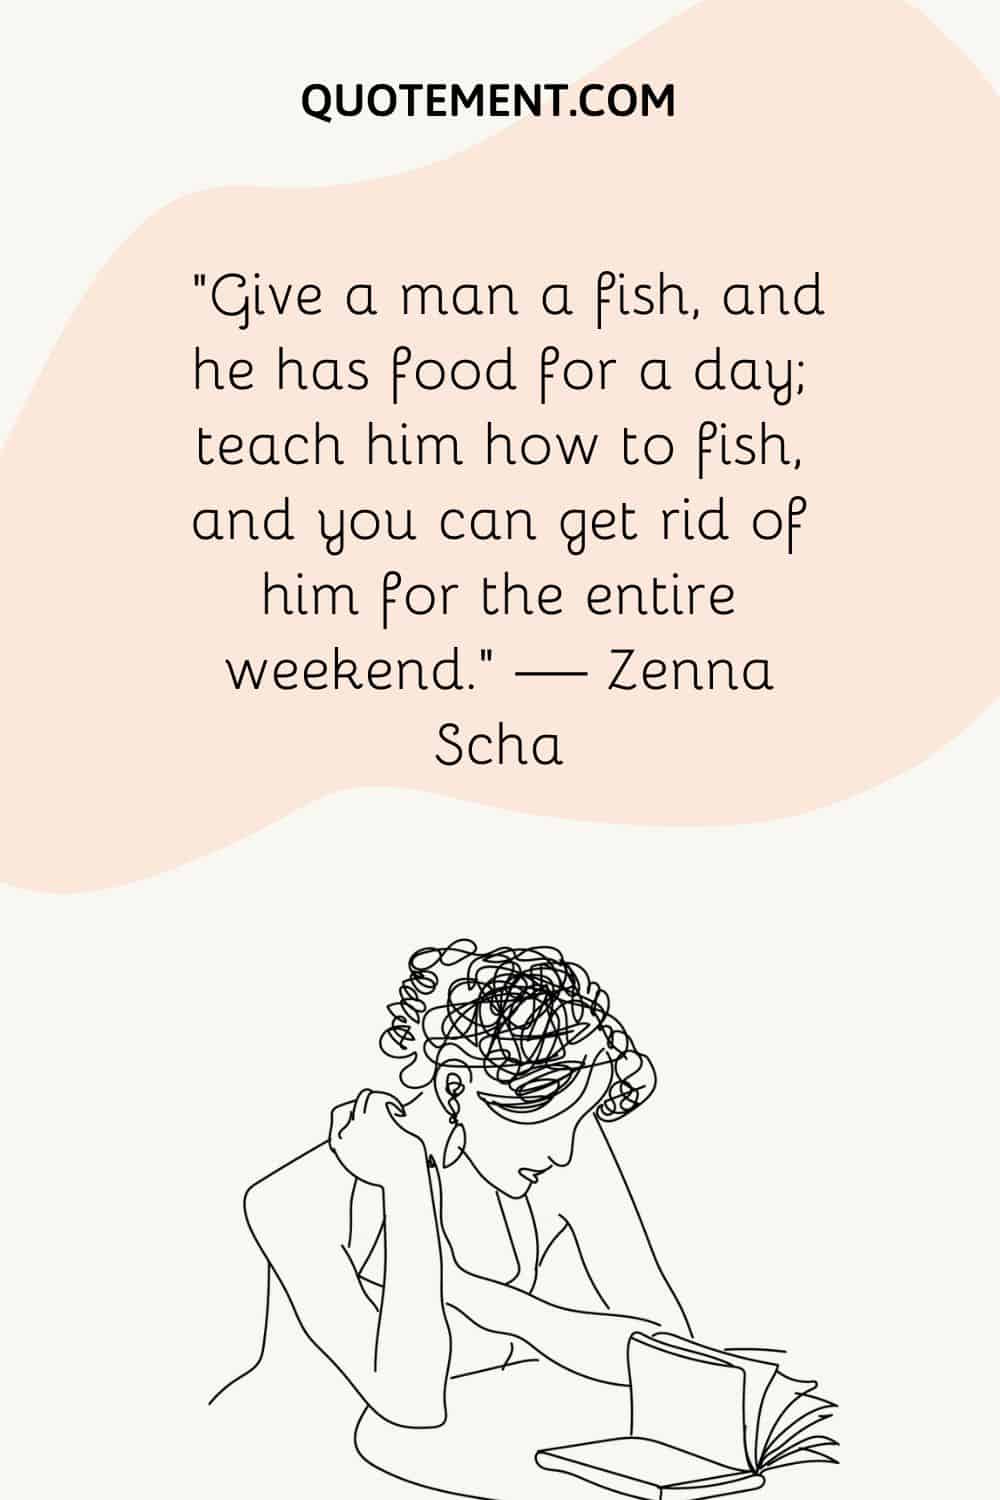 “Give a man a fish, and he has food for a day; teach him how to fish, and you can get rid of him for the entire weekend.” — Zenna Scha